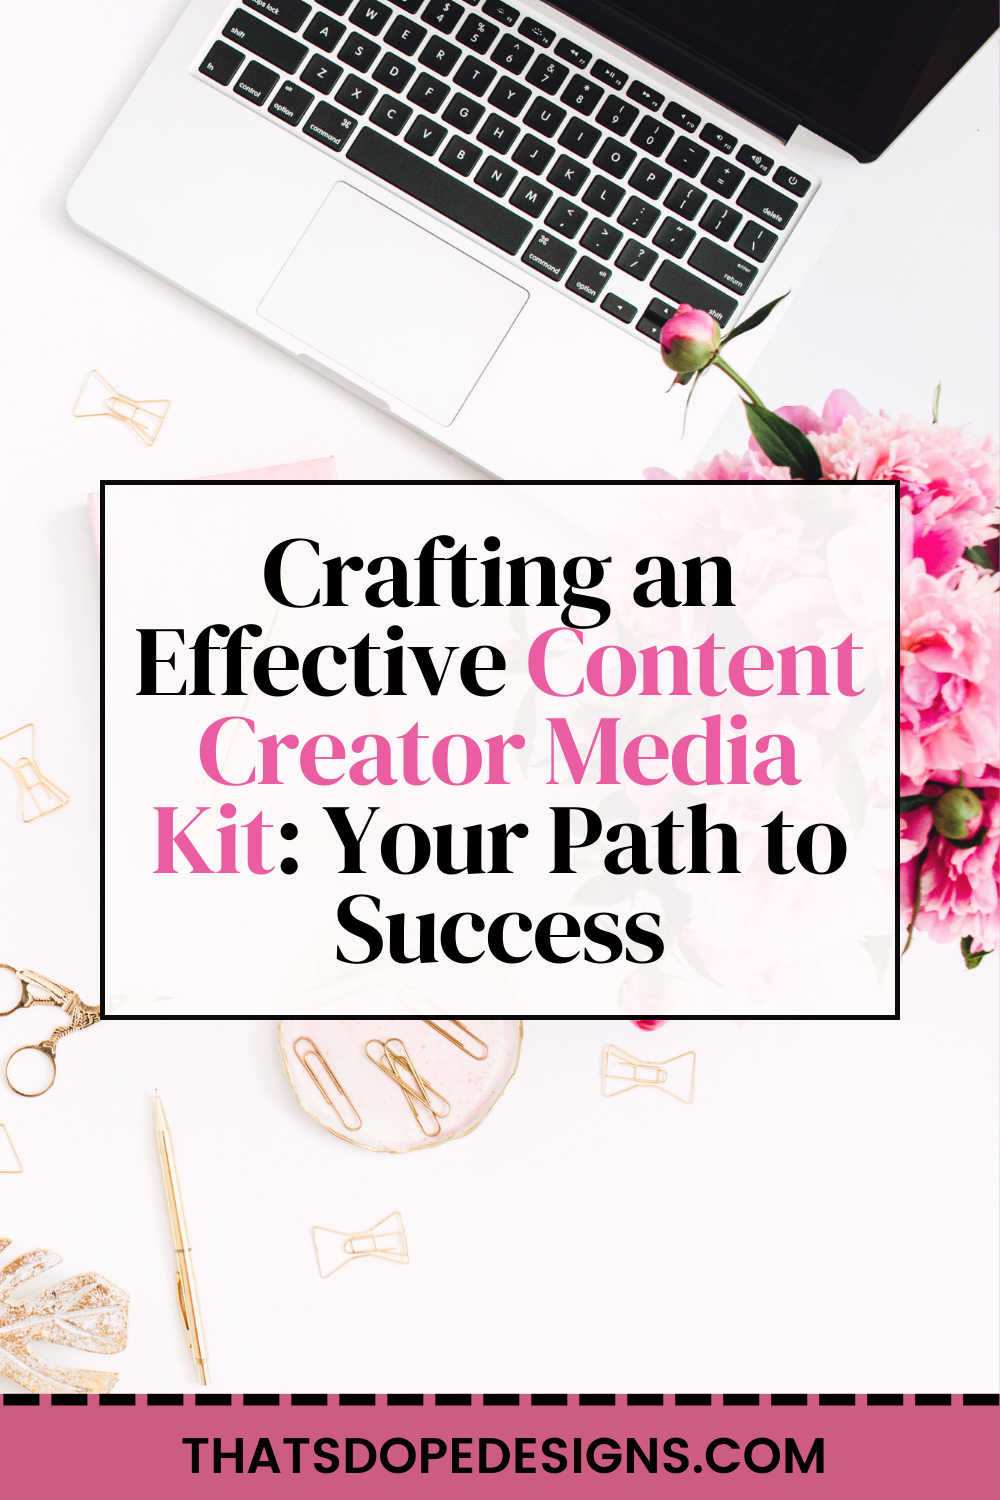 Crafting an Effective Content Creator Media Kit: Your Path to Success